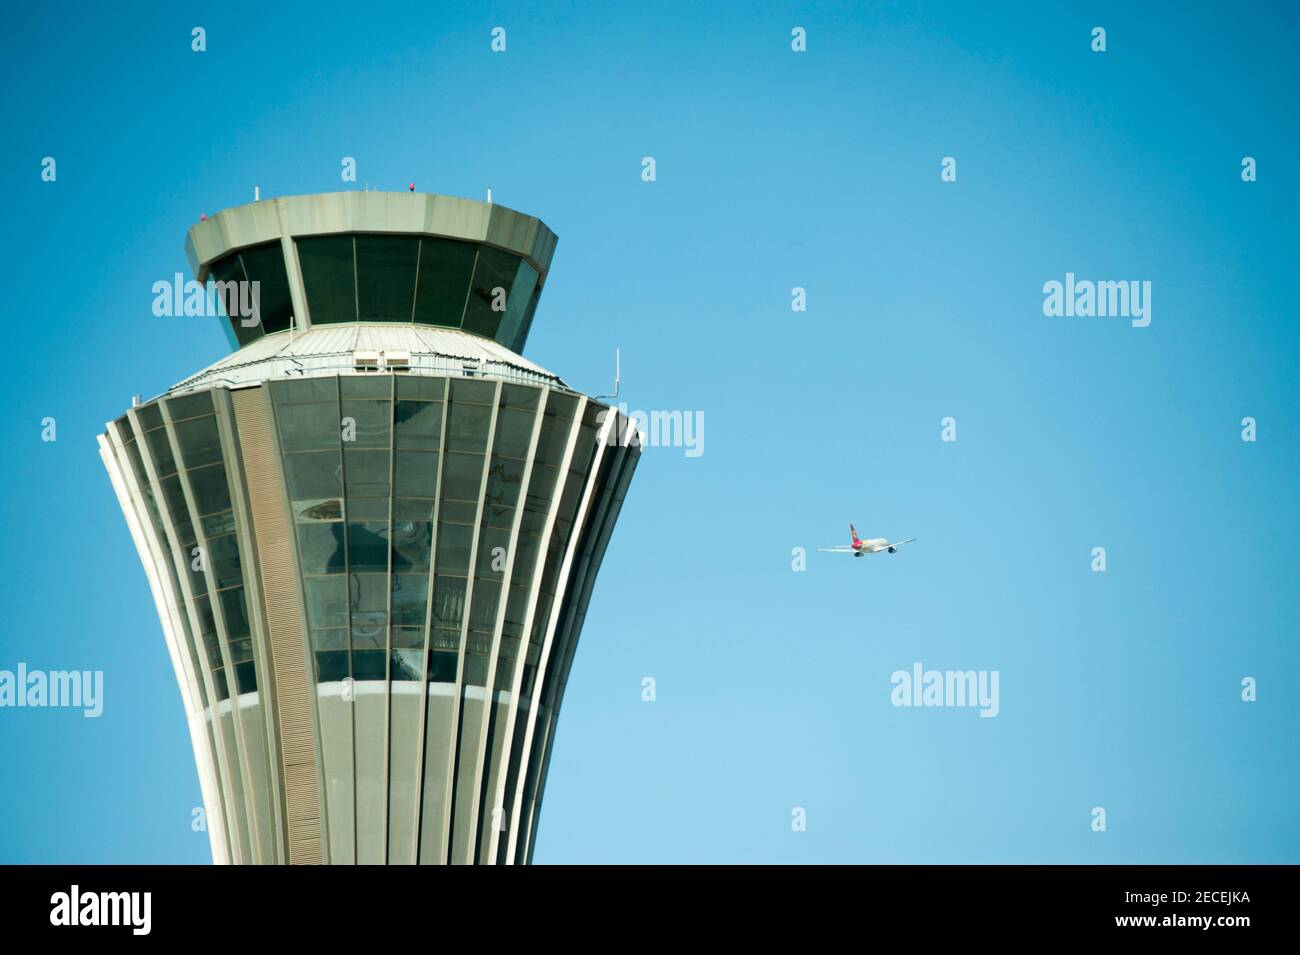 A Shenzhen Airlines aircraft flies past the Air traffic Control tower on departure on a sunny, blue sky, pollution-free day at Beijing Capital Airport, in the Shunyi district of the Chinese capital, Beijing, China, PRC. © Time-Snaps Stock Photo